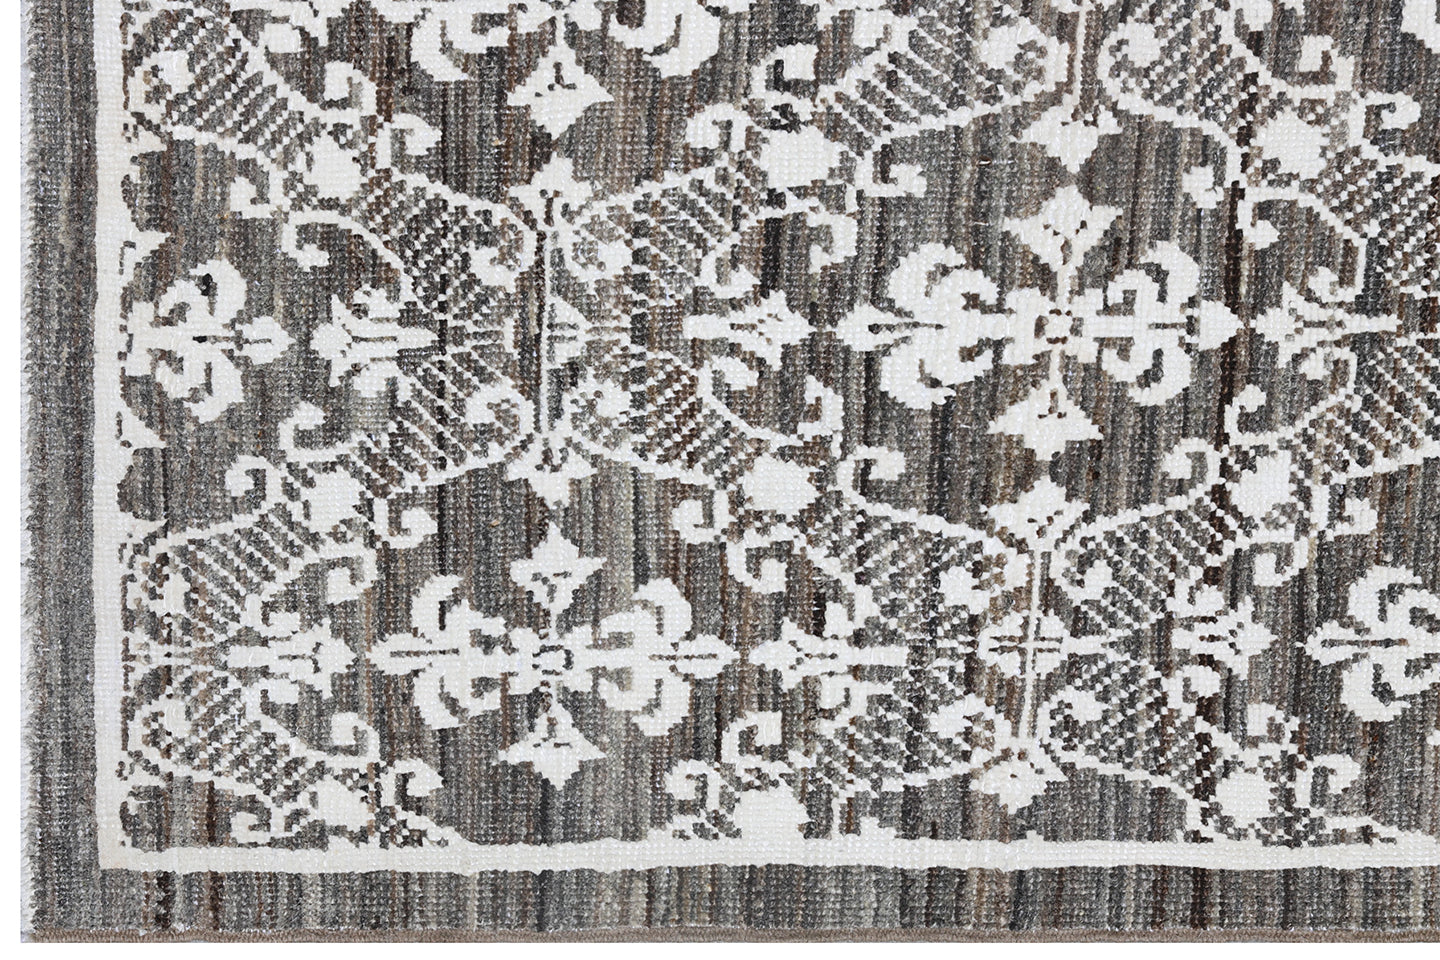 10'x14' Brown and Stark White Cotton Ottoman Ariana Transitional Rug